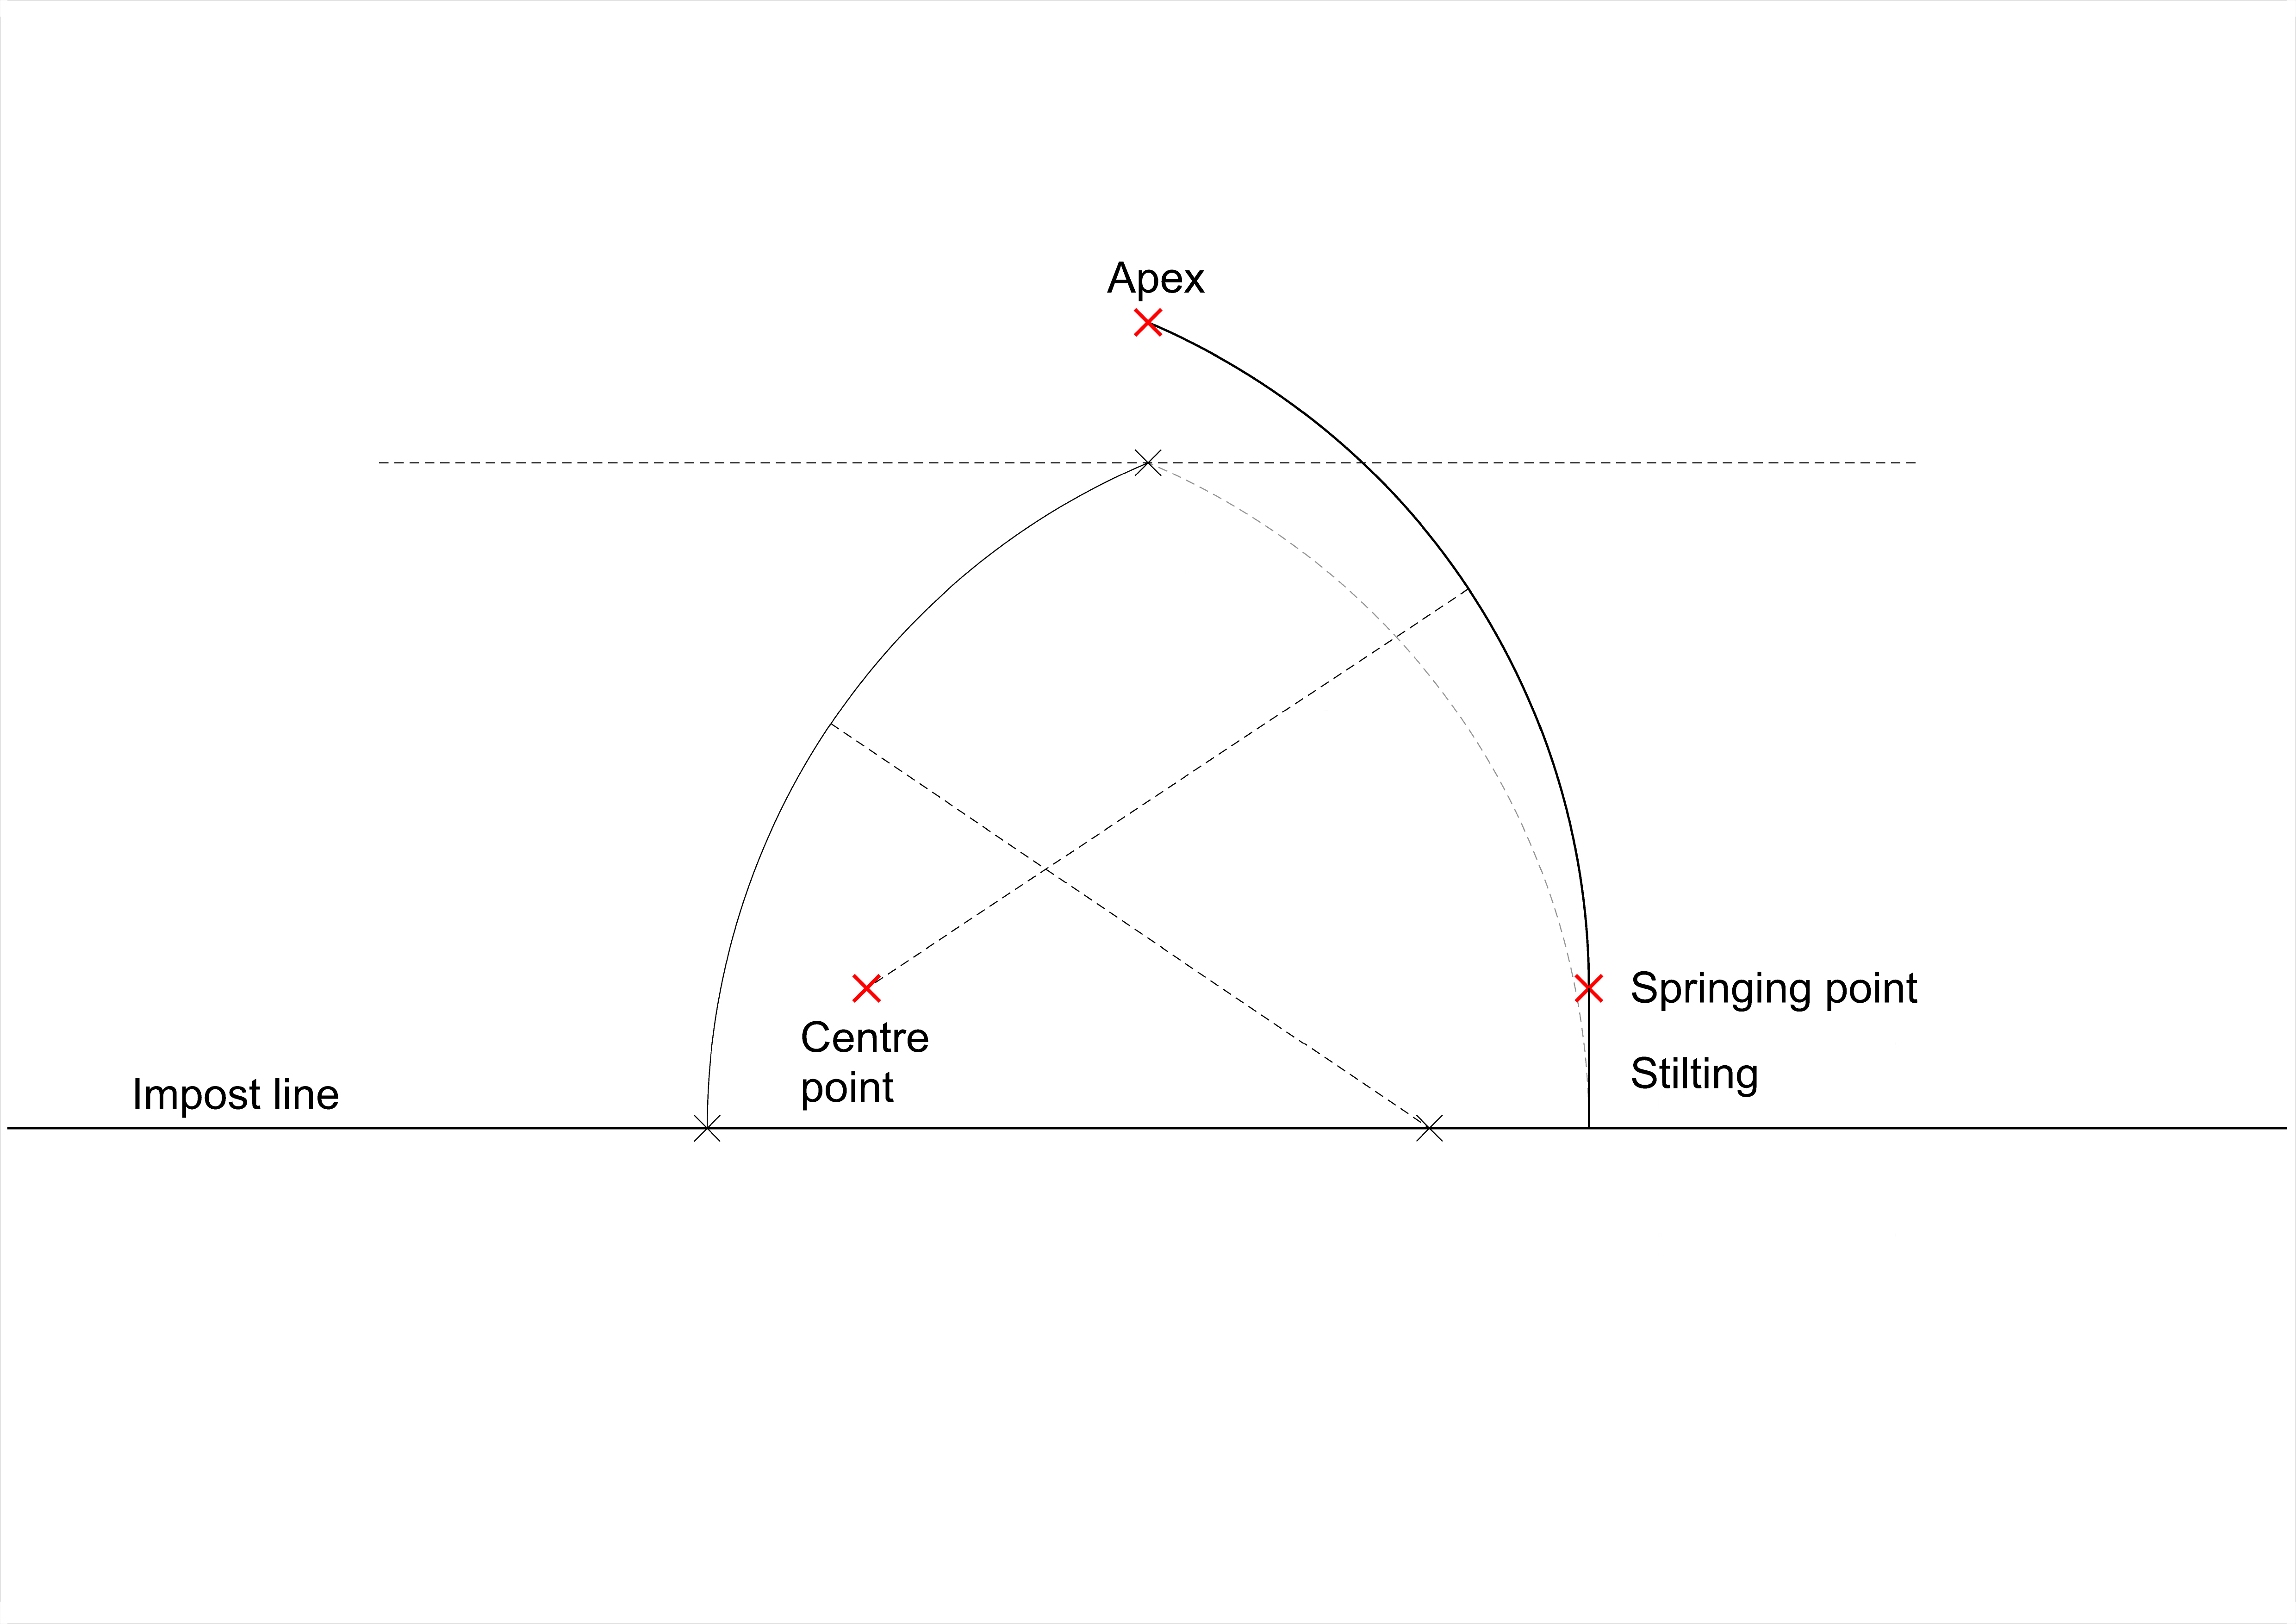 Left-hand arc as previous; right-hand arc showing effect of raising the centre point